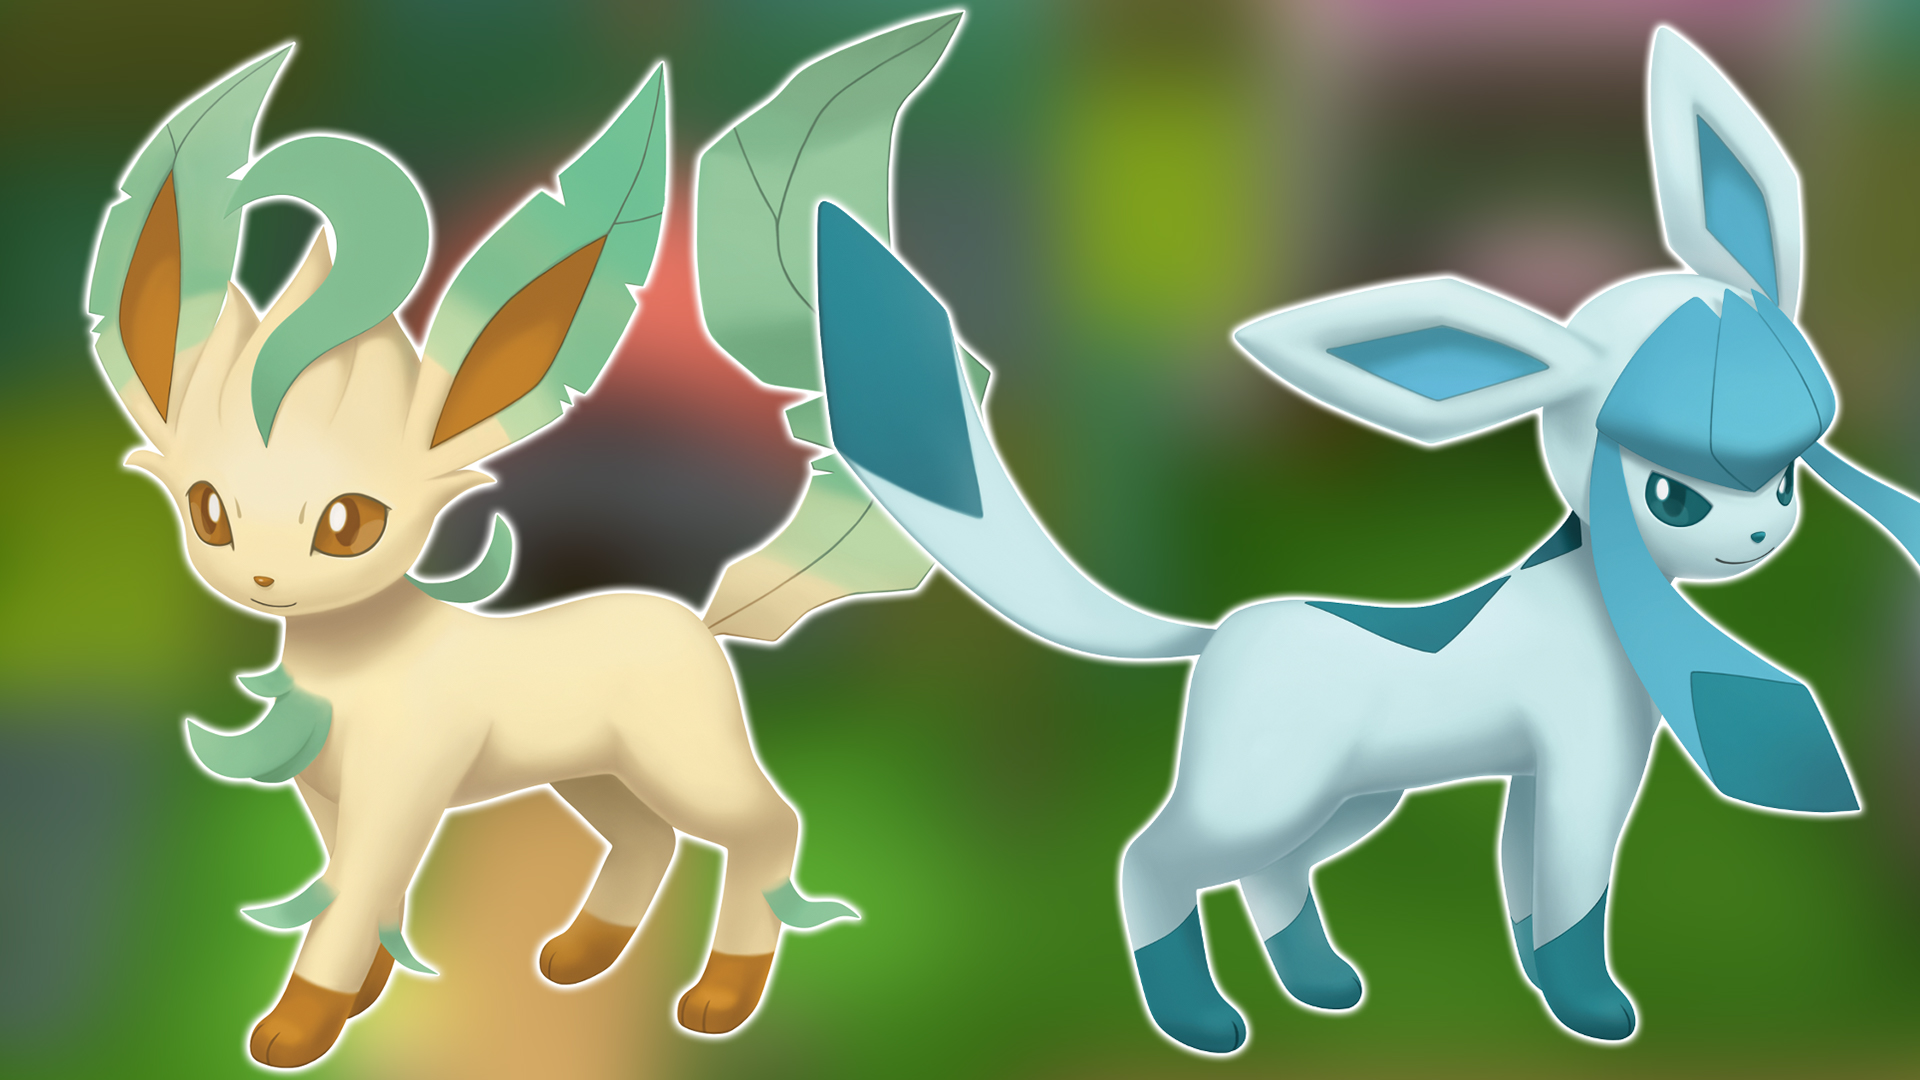 Special Leafeon V and Glaceon V Promo Pre-Order Bonus From Pokémon  Brilliant Diamond and Shining Pearl Coming, PokeGuardian